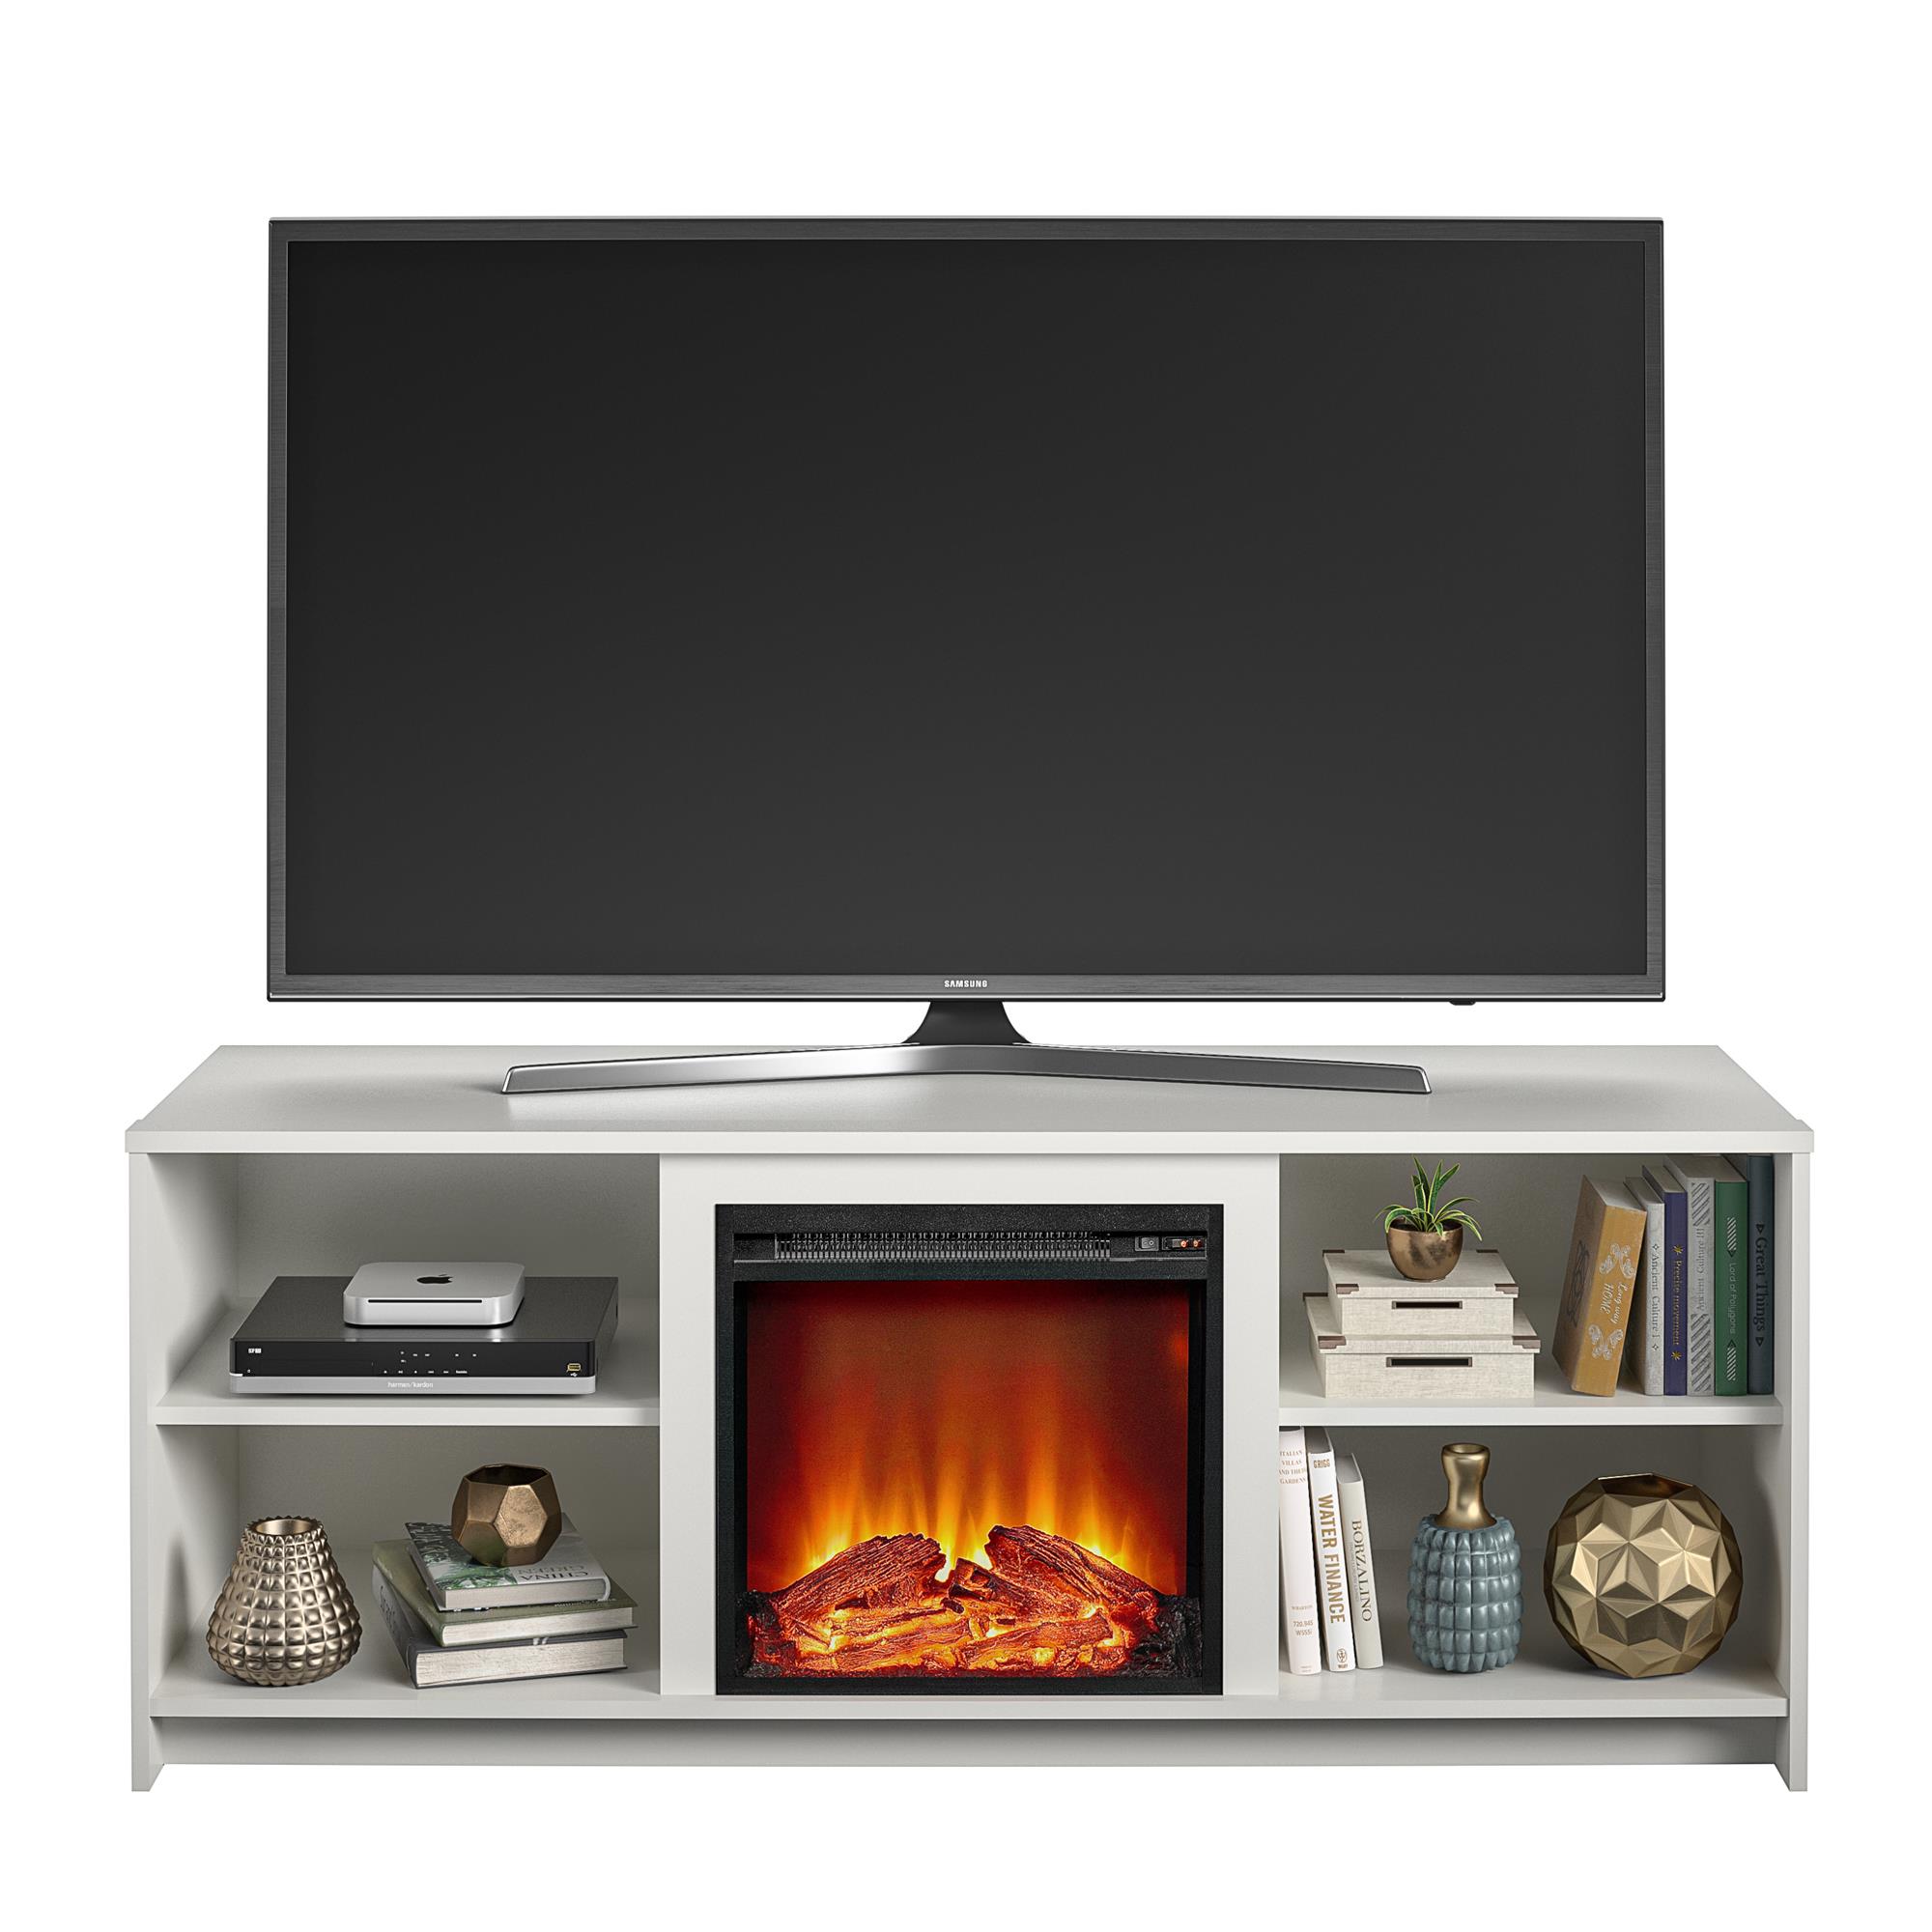 Mainstays Fireplace TV Stand for TVs up to 65", White - image 3 of 11